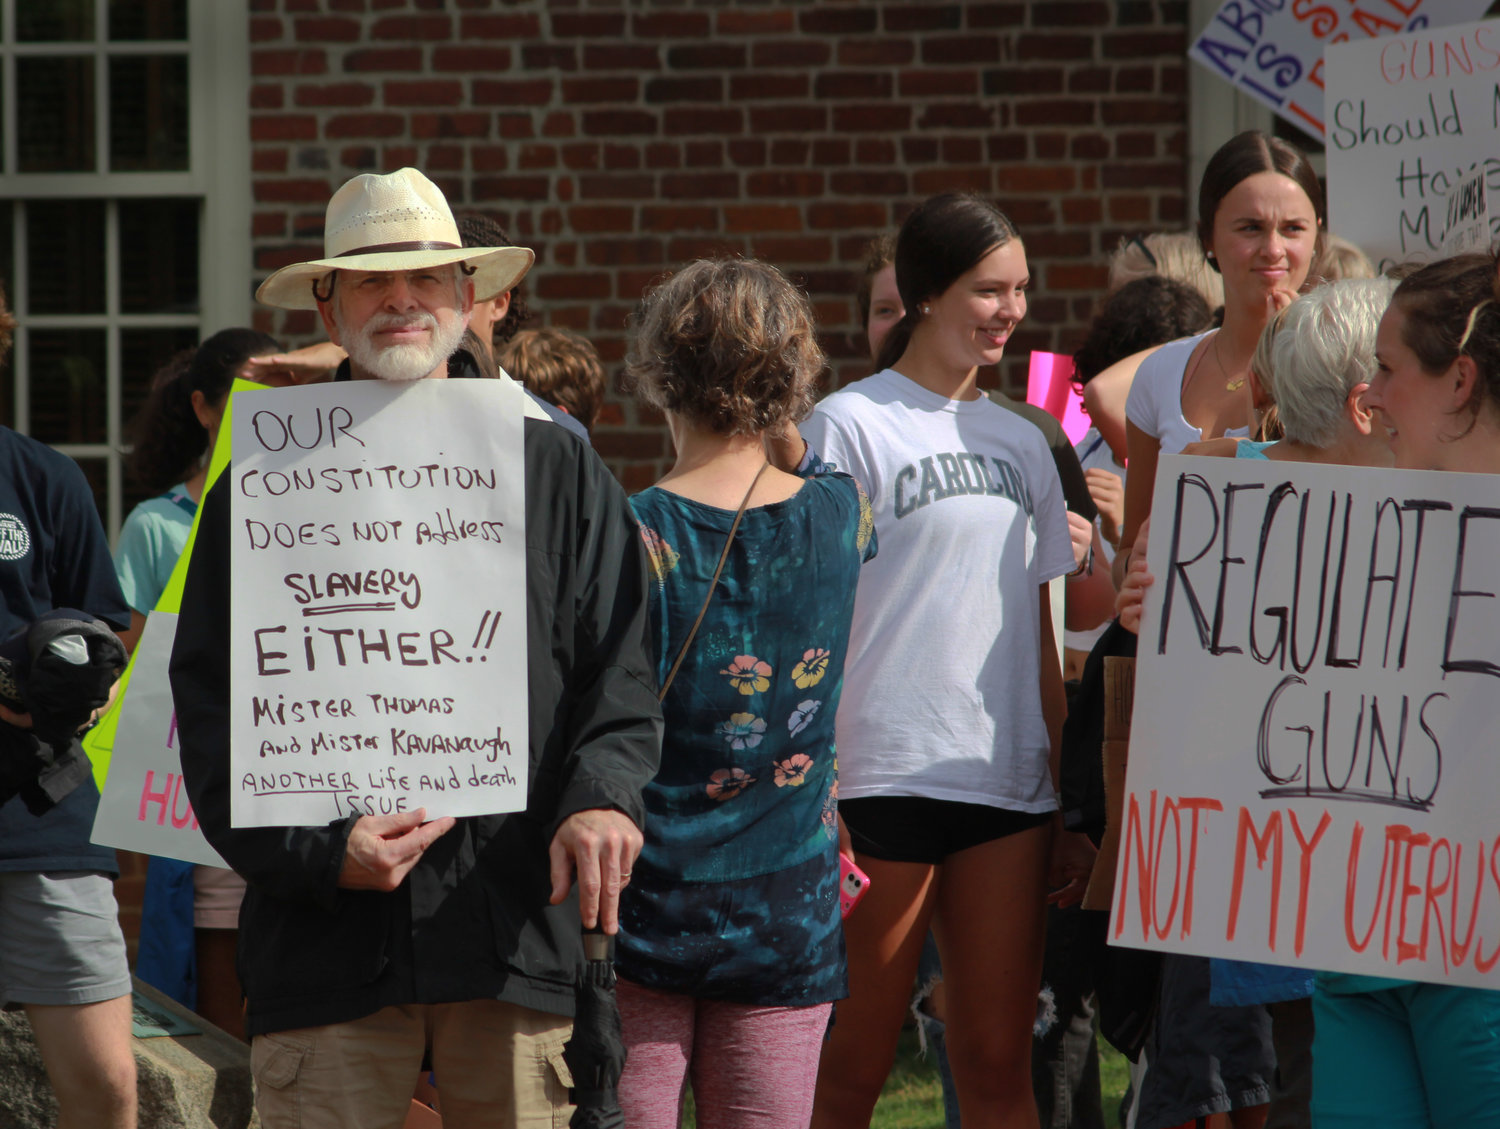 People of all genders participate in the abortion and women’s rights protest on Monday at the Historic Courthouse in Pittsboro. The storms from earlier in the day had subsided just in time for the protest.